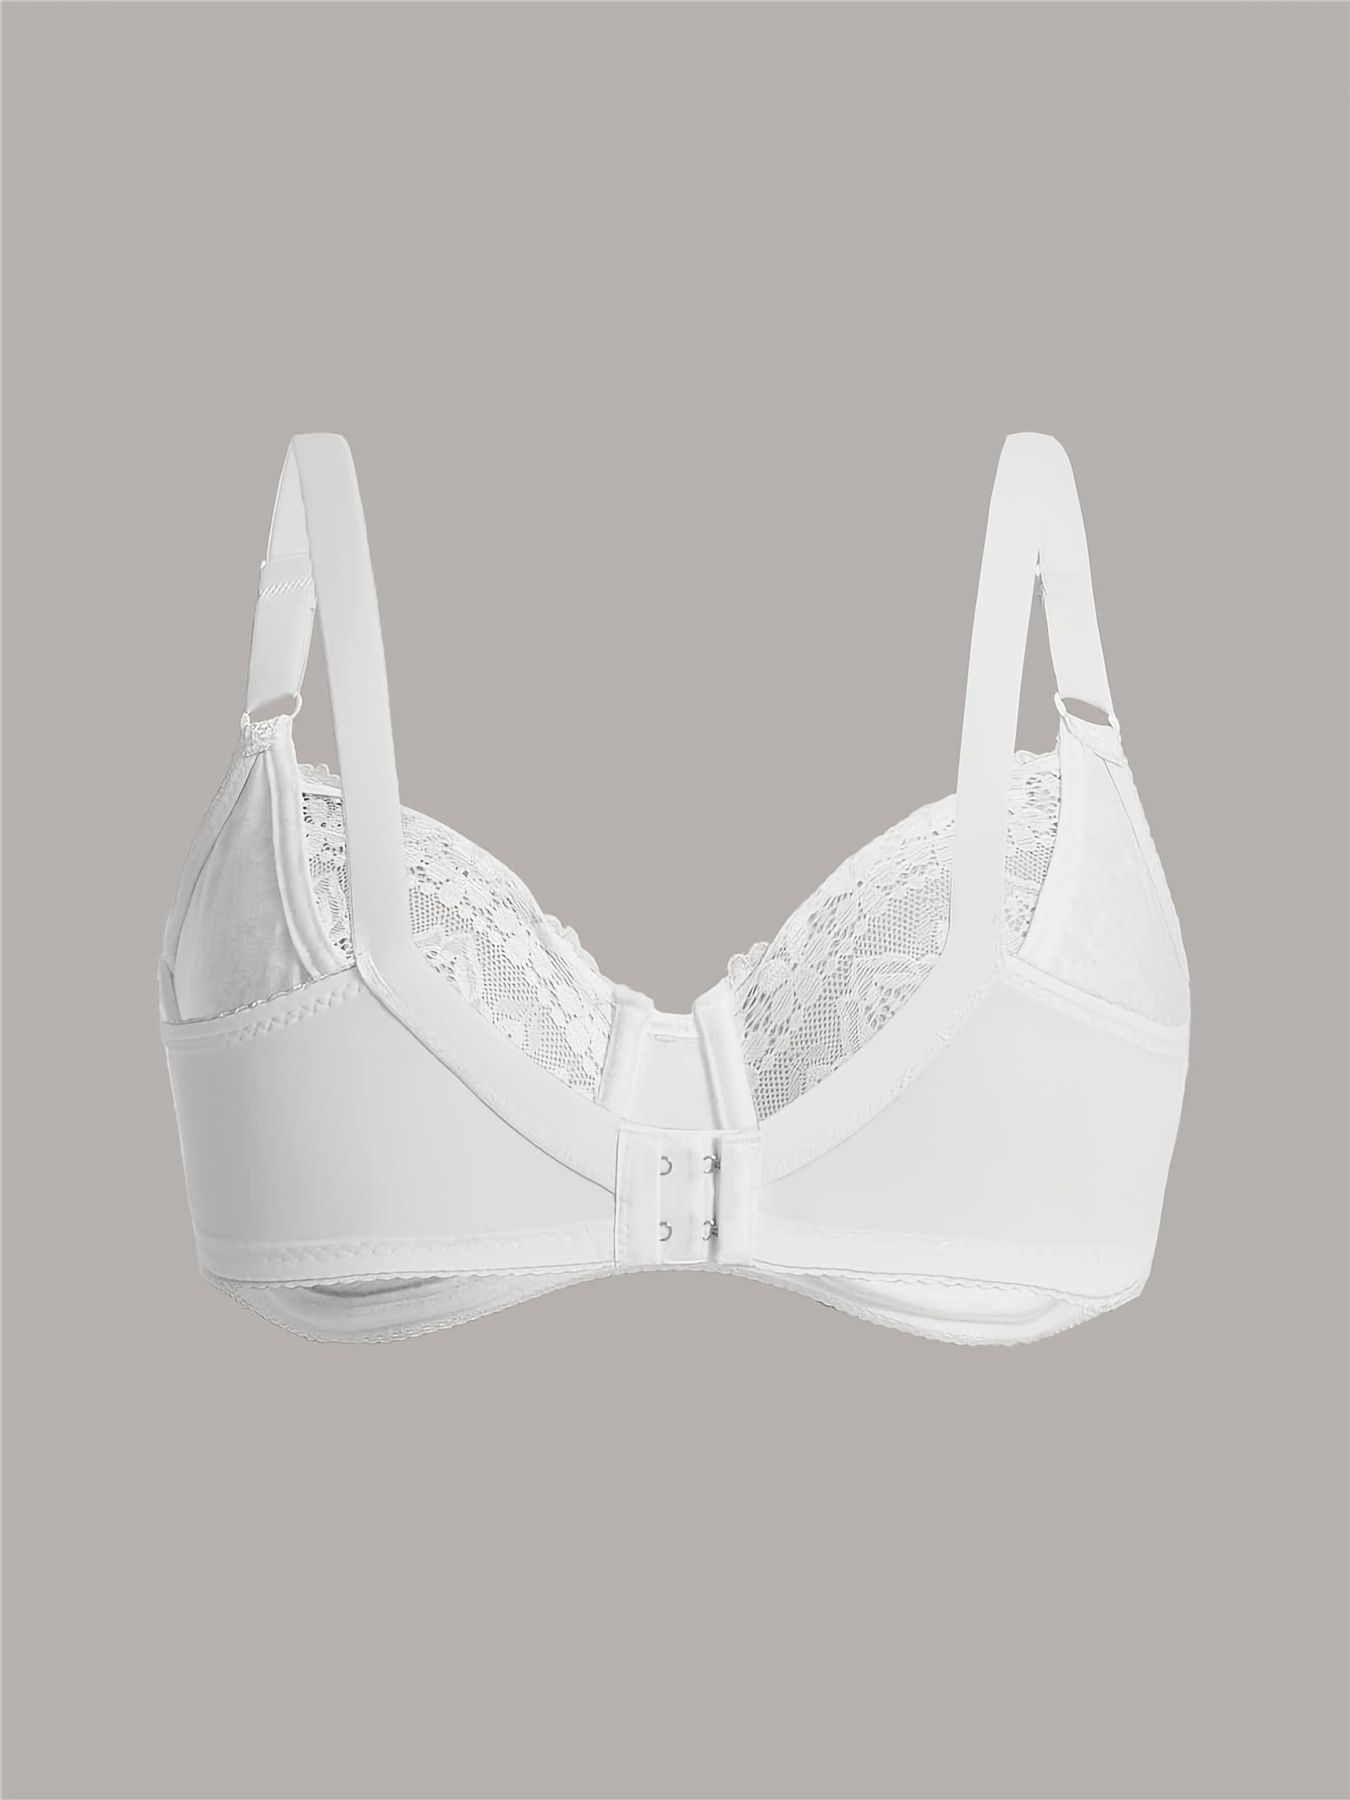 Top Sexy Lace Cover Delicate Embroidery Womne Bra Comfy Leisure Lingerie  Intimate Cotton Bralette Support Push Up Plus Size C26